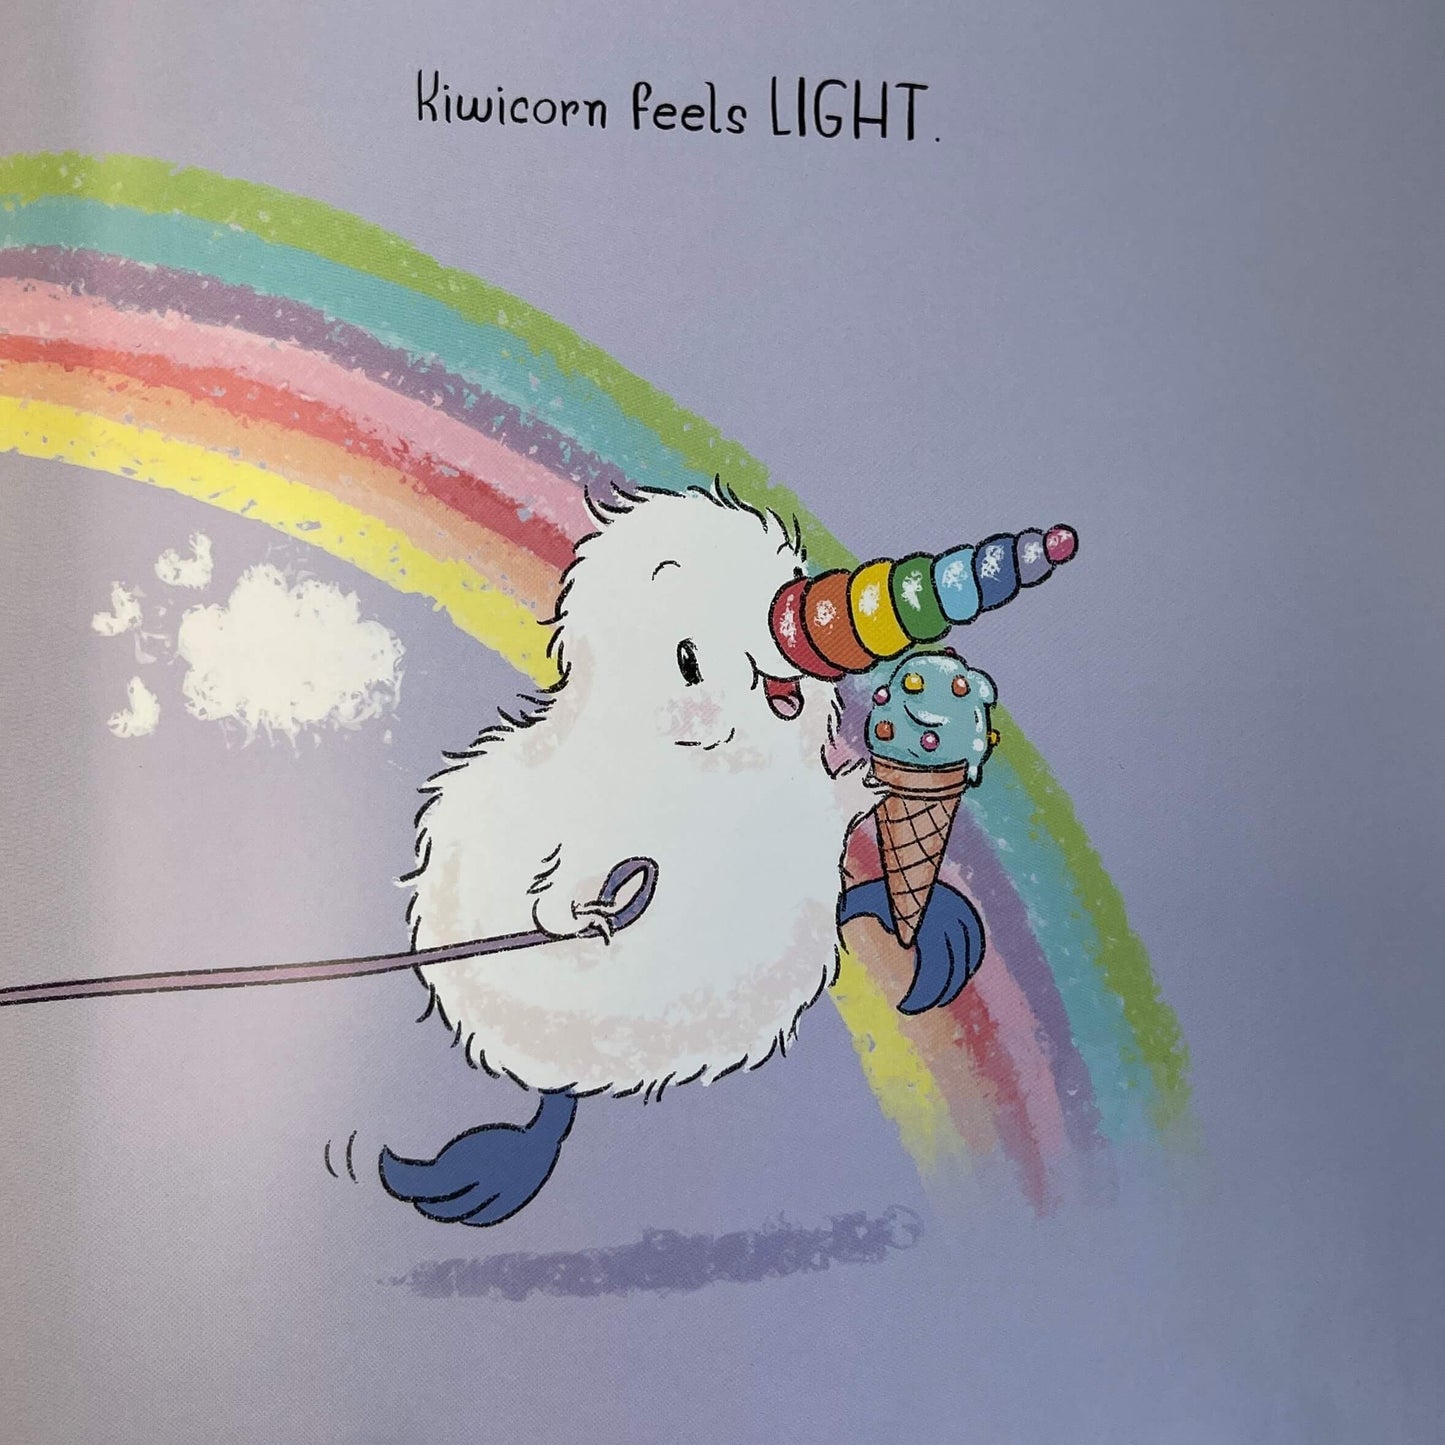 Page from Childrens book Kiwicorns Flurry of Feelings by Kat Quin.